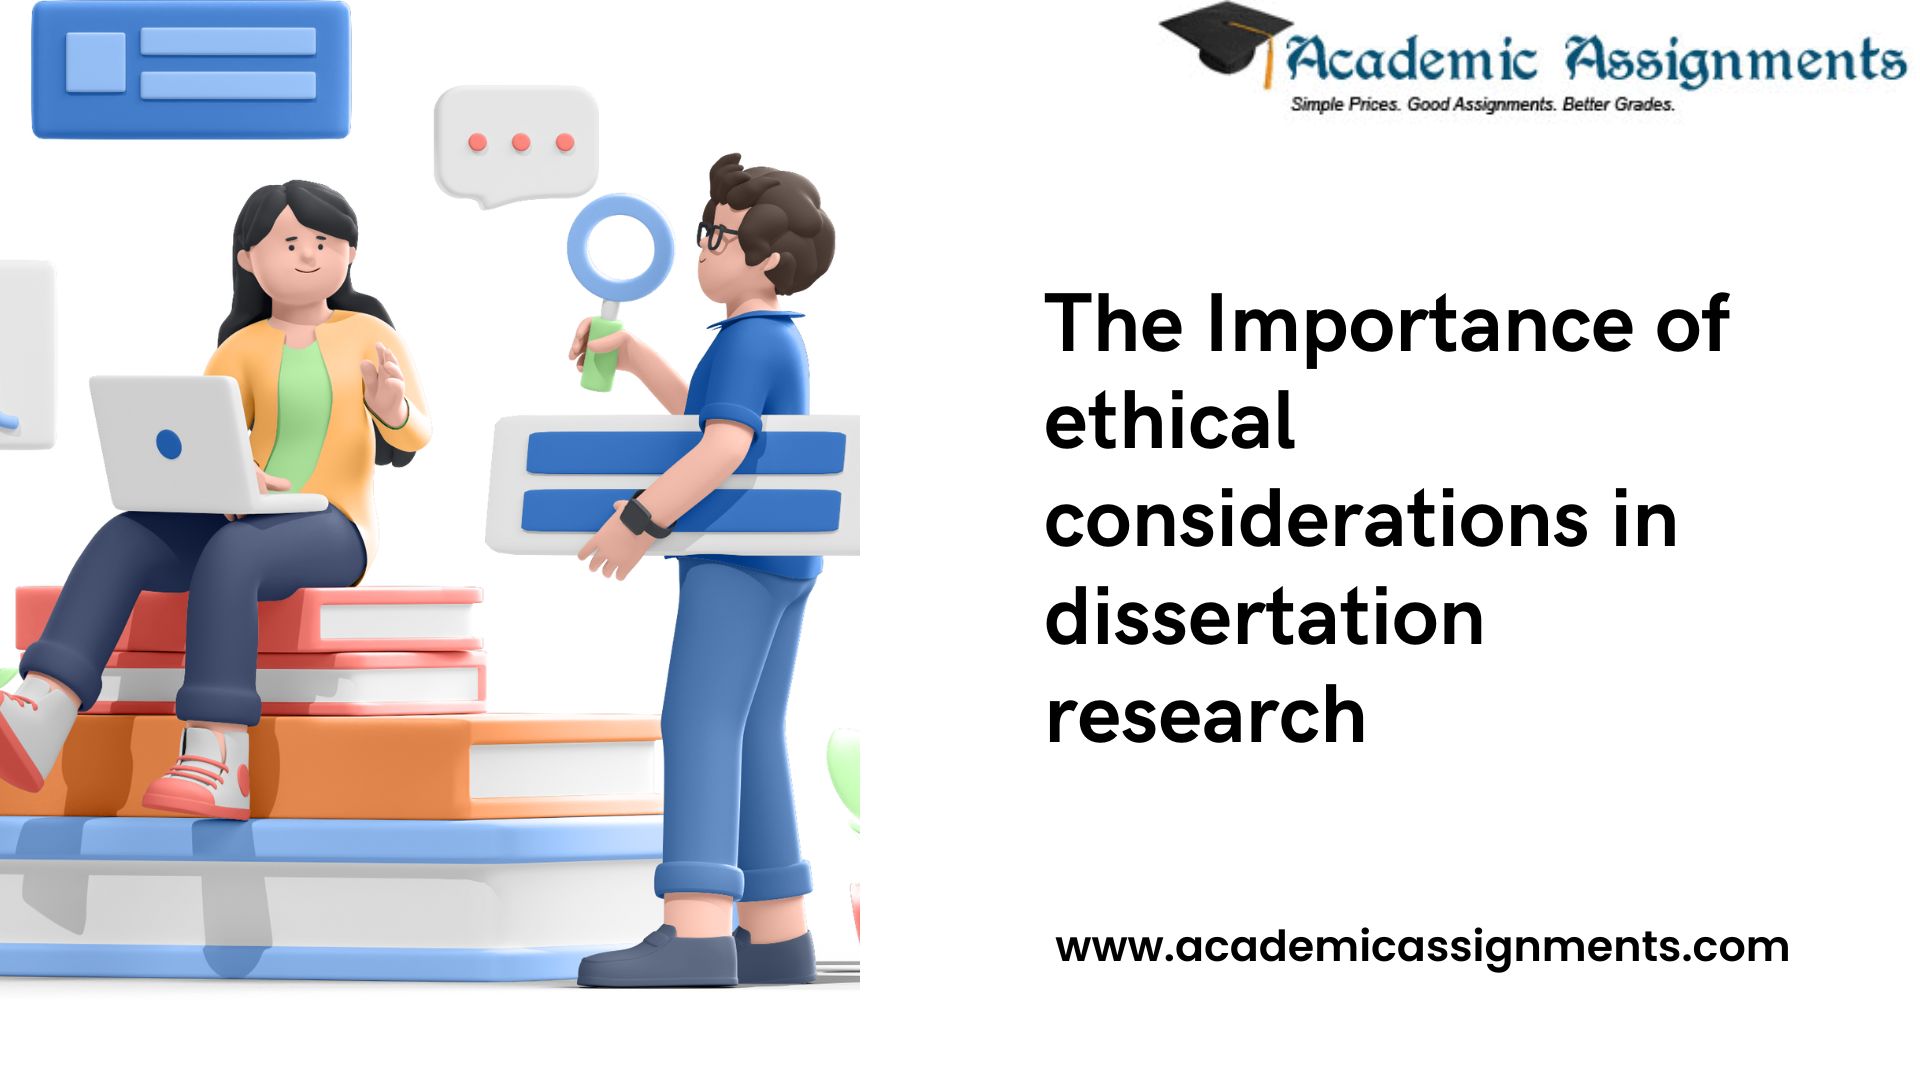 The Importance of ethical considerations in dissertation research